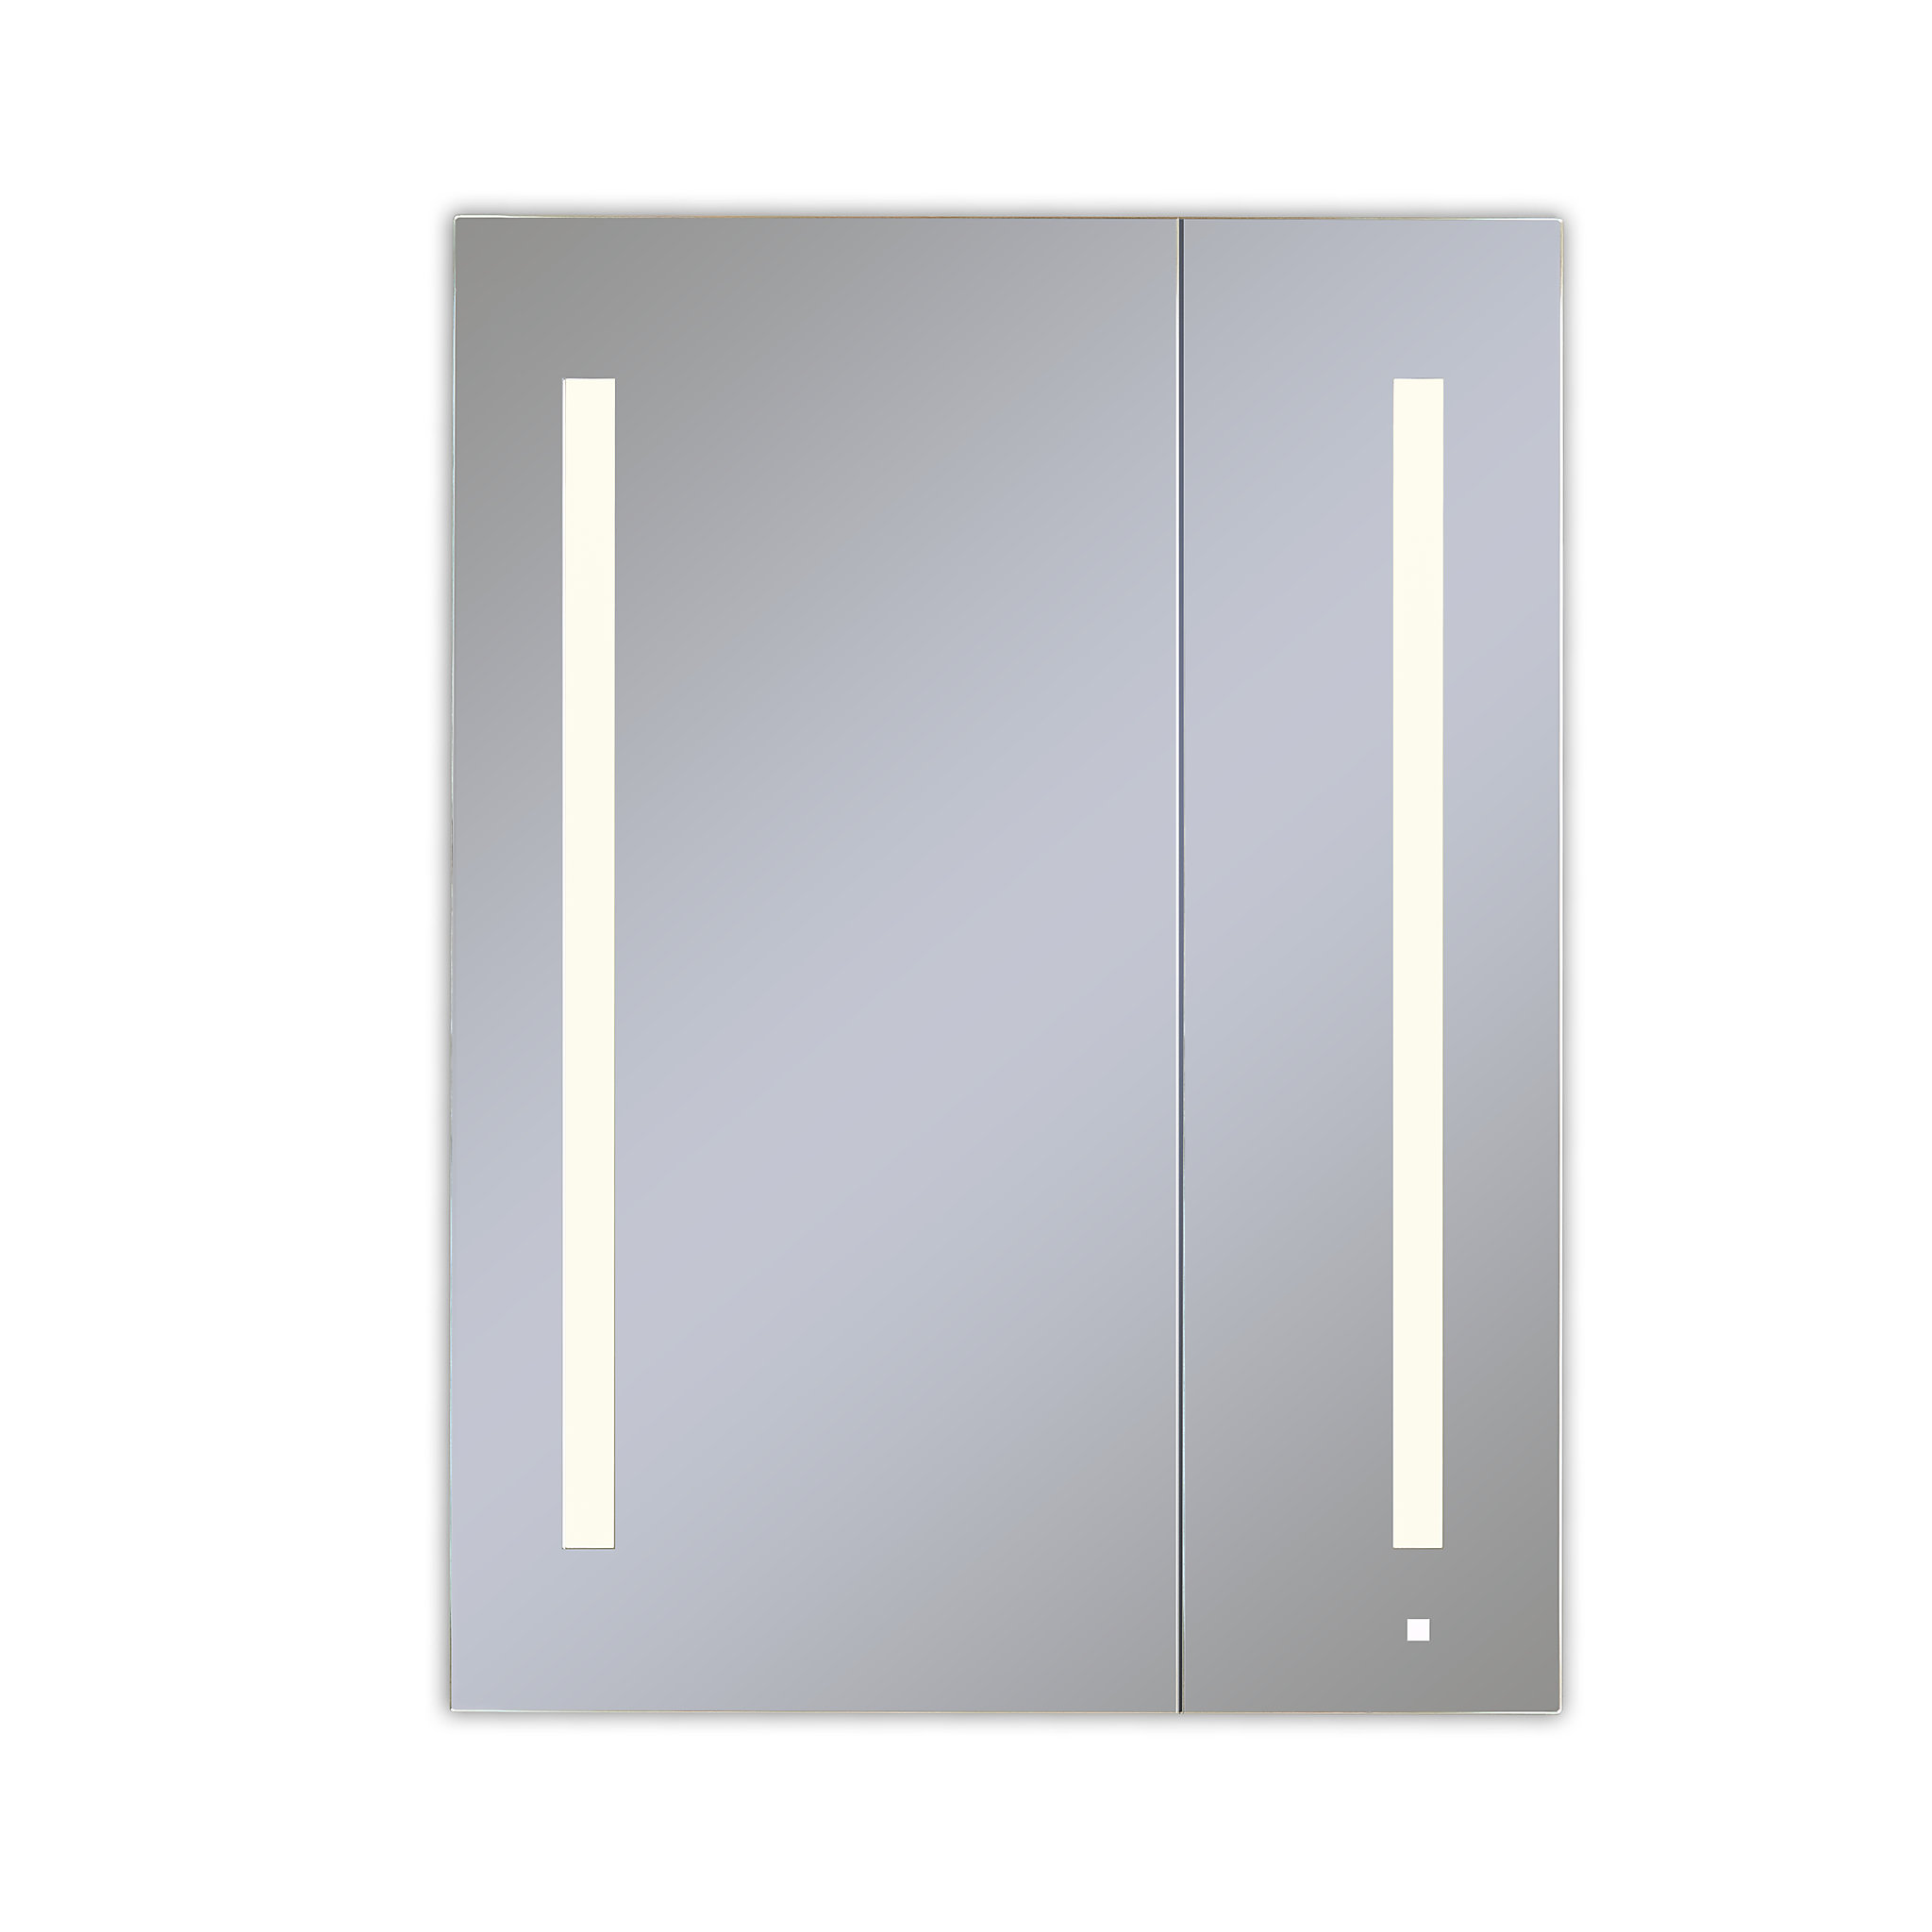 Robern AC3040D4P2LAW AiO Lighted Cabinet, 30" x 40" x 4", Two Door, LUM Lighting, 2700K Temperature (Warm Light), Dimmable, OM A